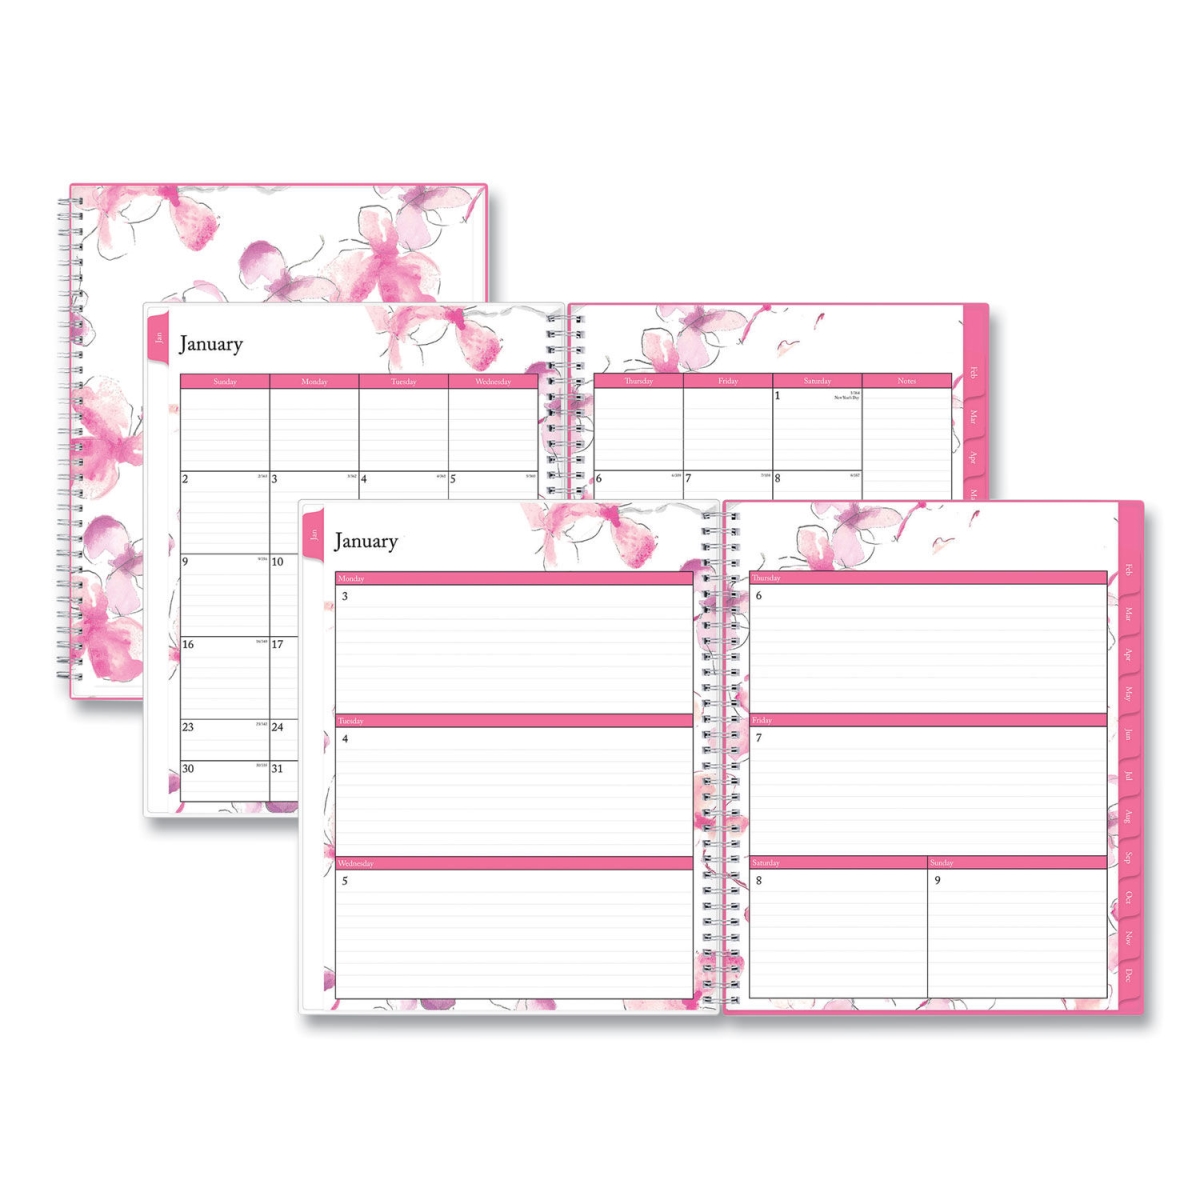 Blue Sky Herbal Inc Blue Sky 137268 11 x 8.5 in. Breast Cancer Awareness Create-Your-Own Cover Weekly & Monthly Planner Orchid Artwork